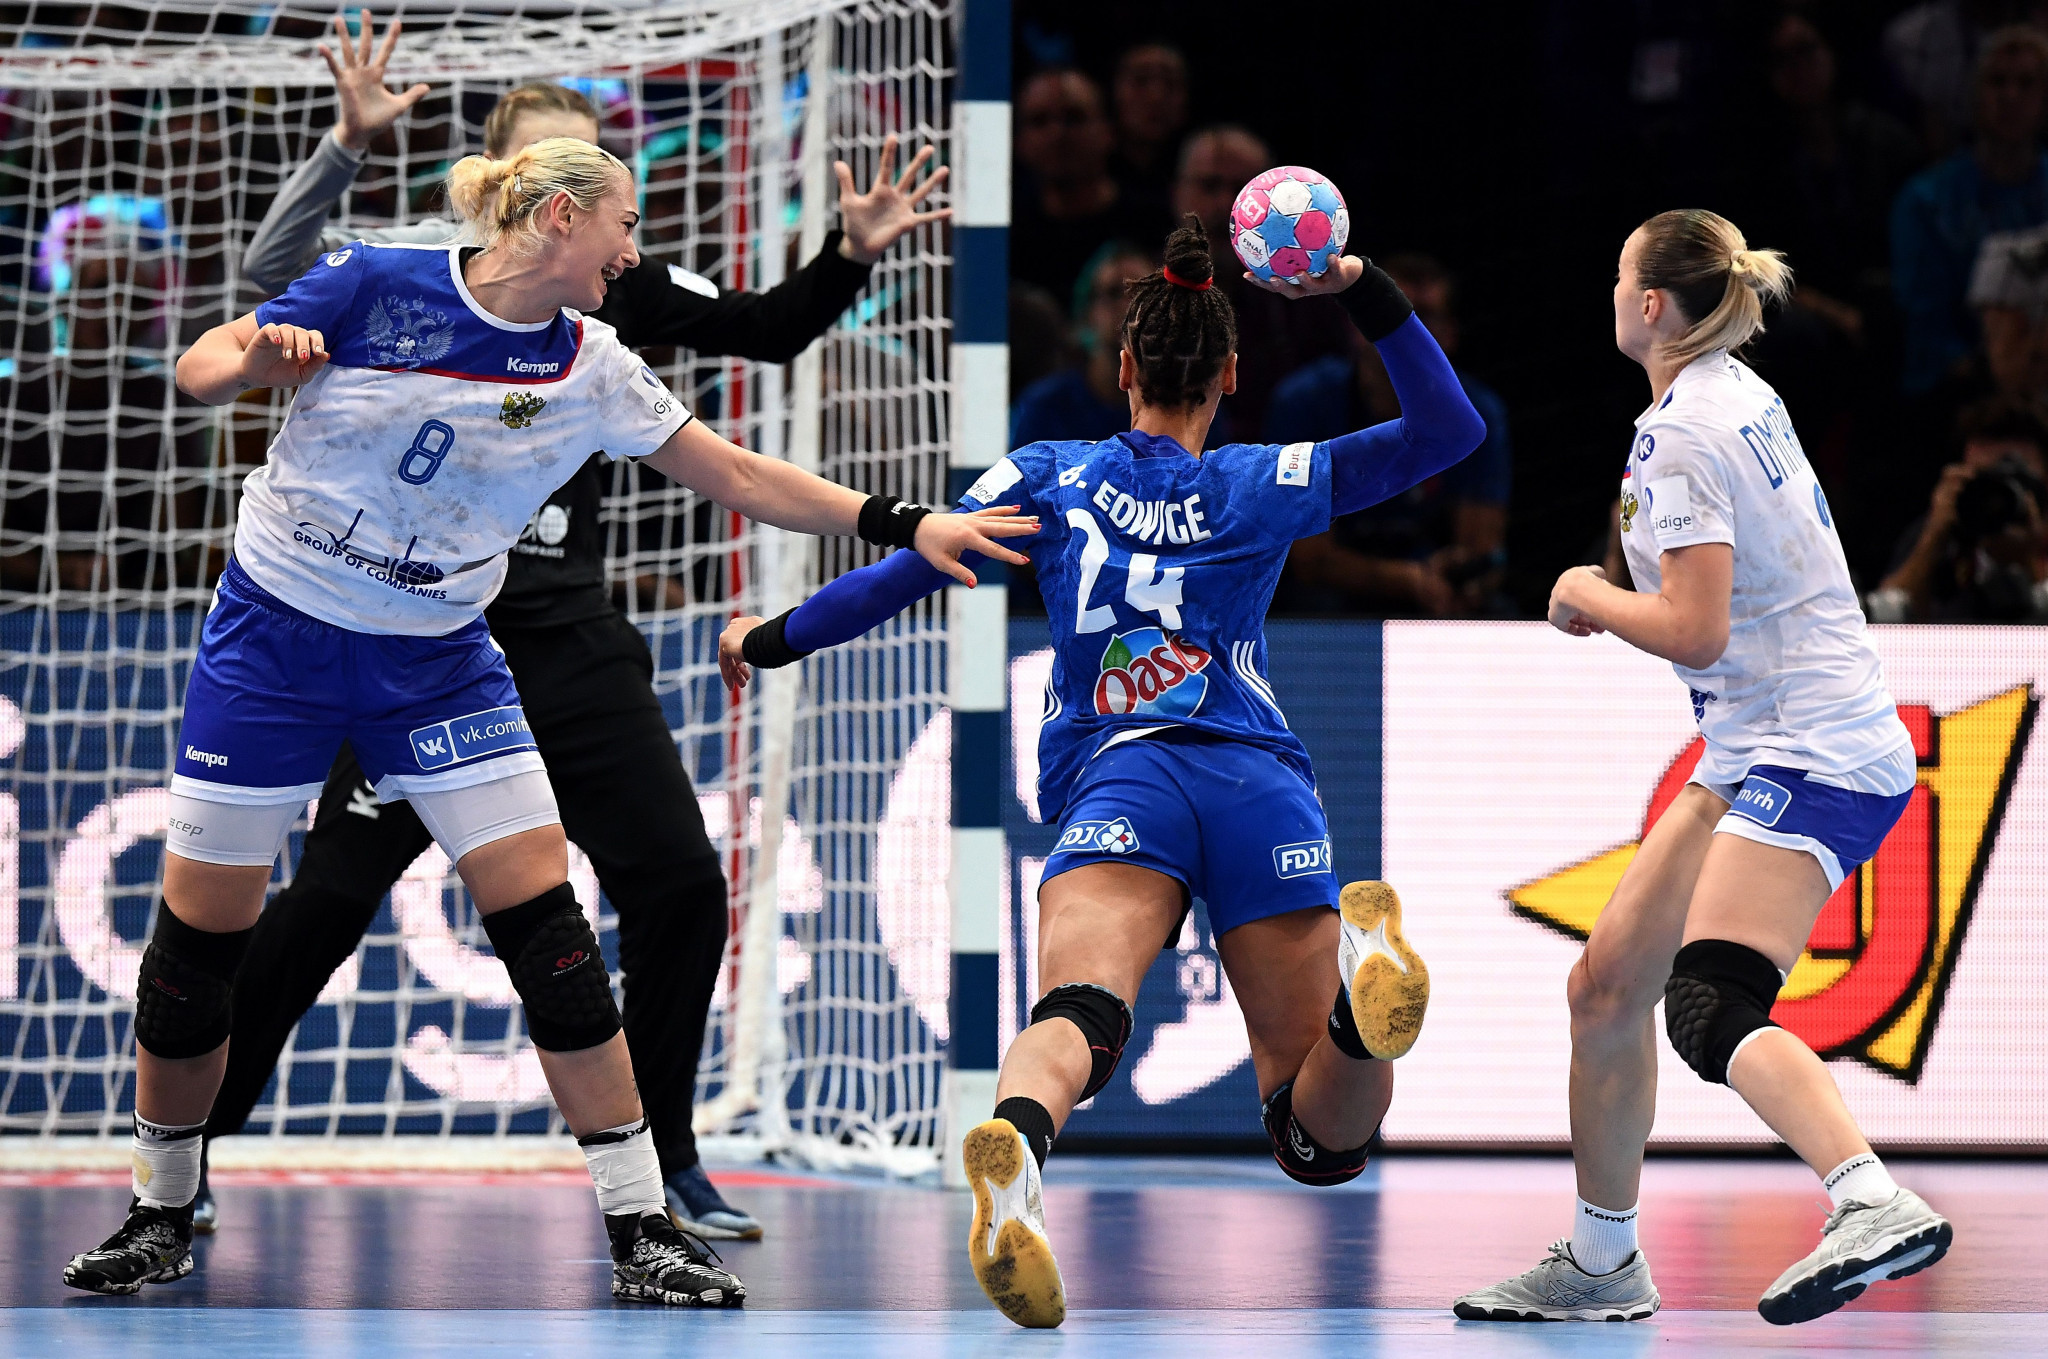 France beat Russia in the final of the 2018 European Women’s Handball Championship ©Getty Images